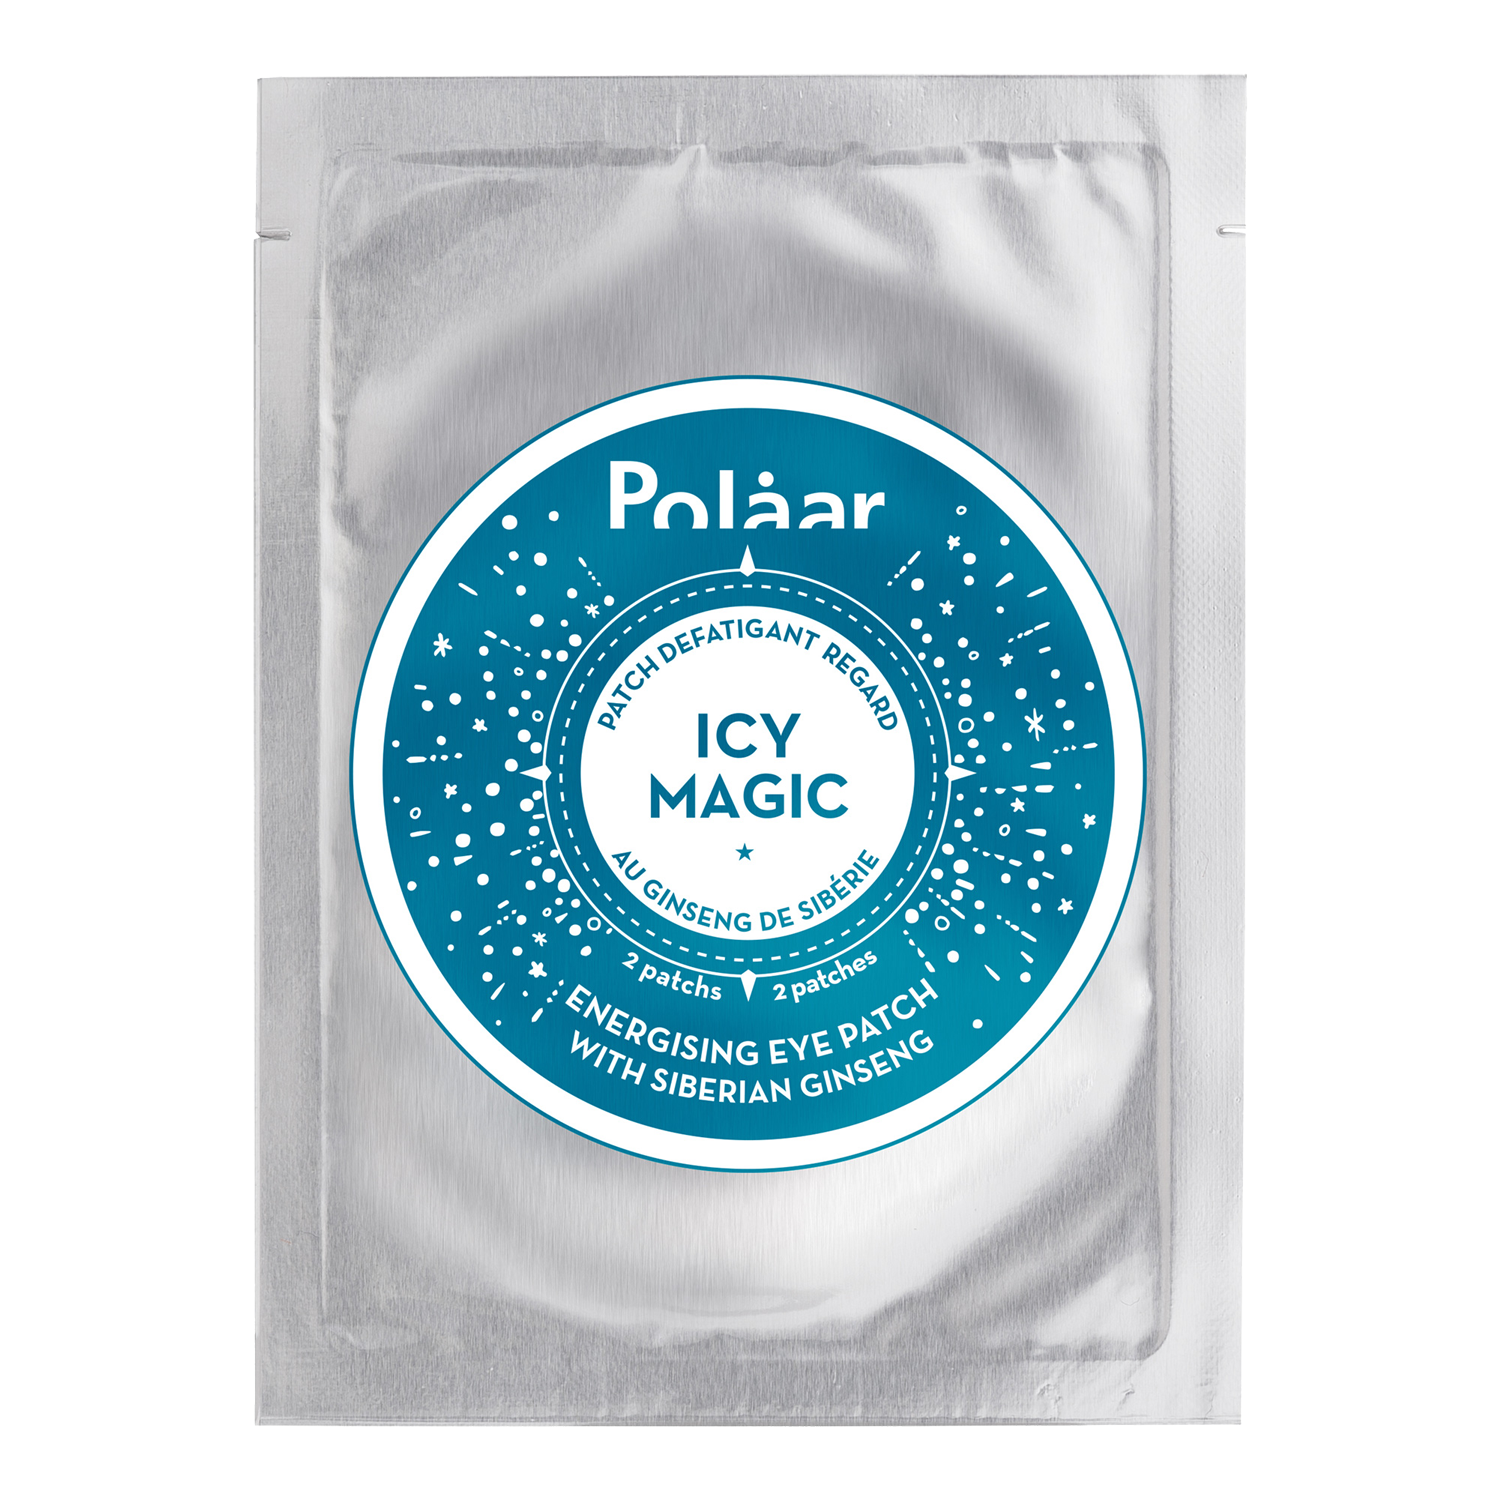 Polaar Energizing Eye Patch IcyMagic with Siberian Ginseng - 4 pairs  1